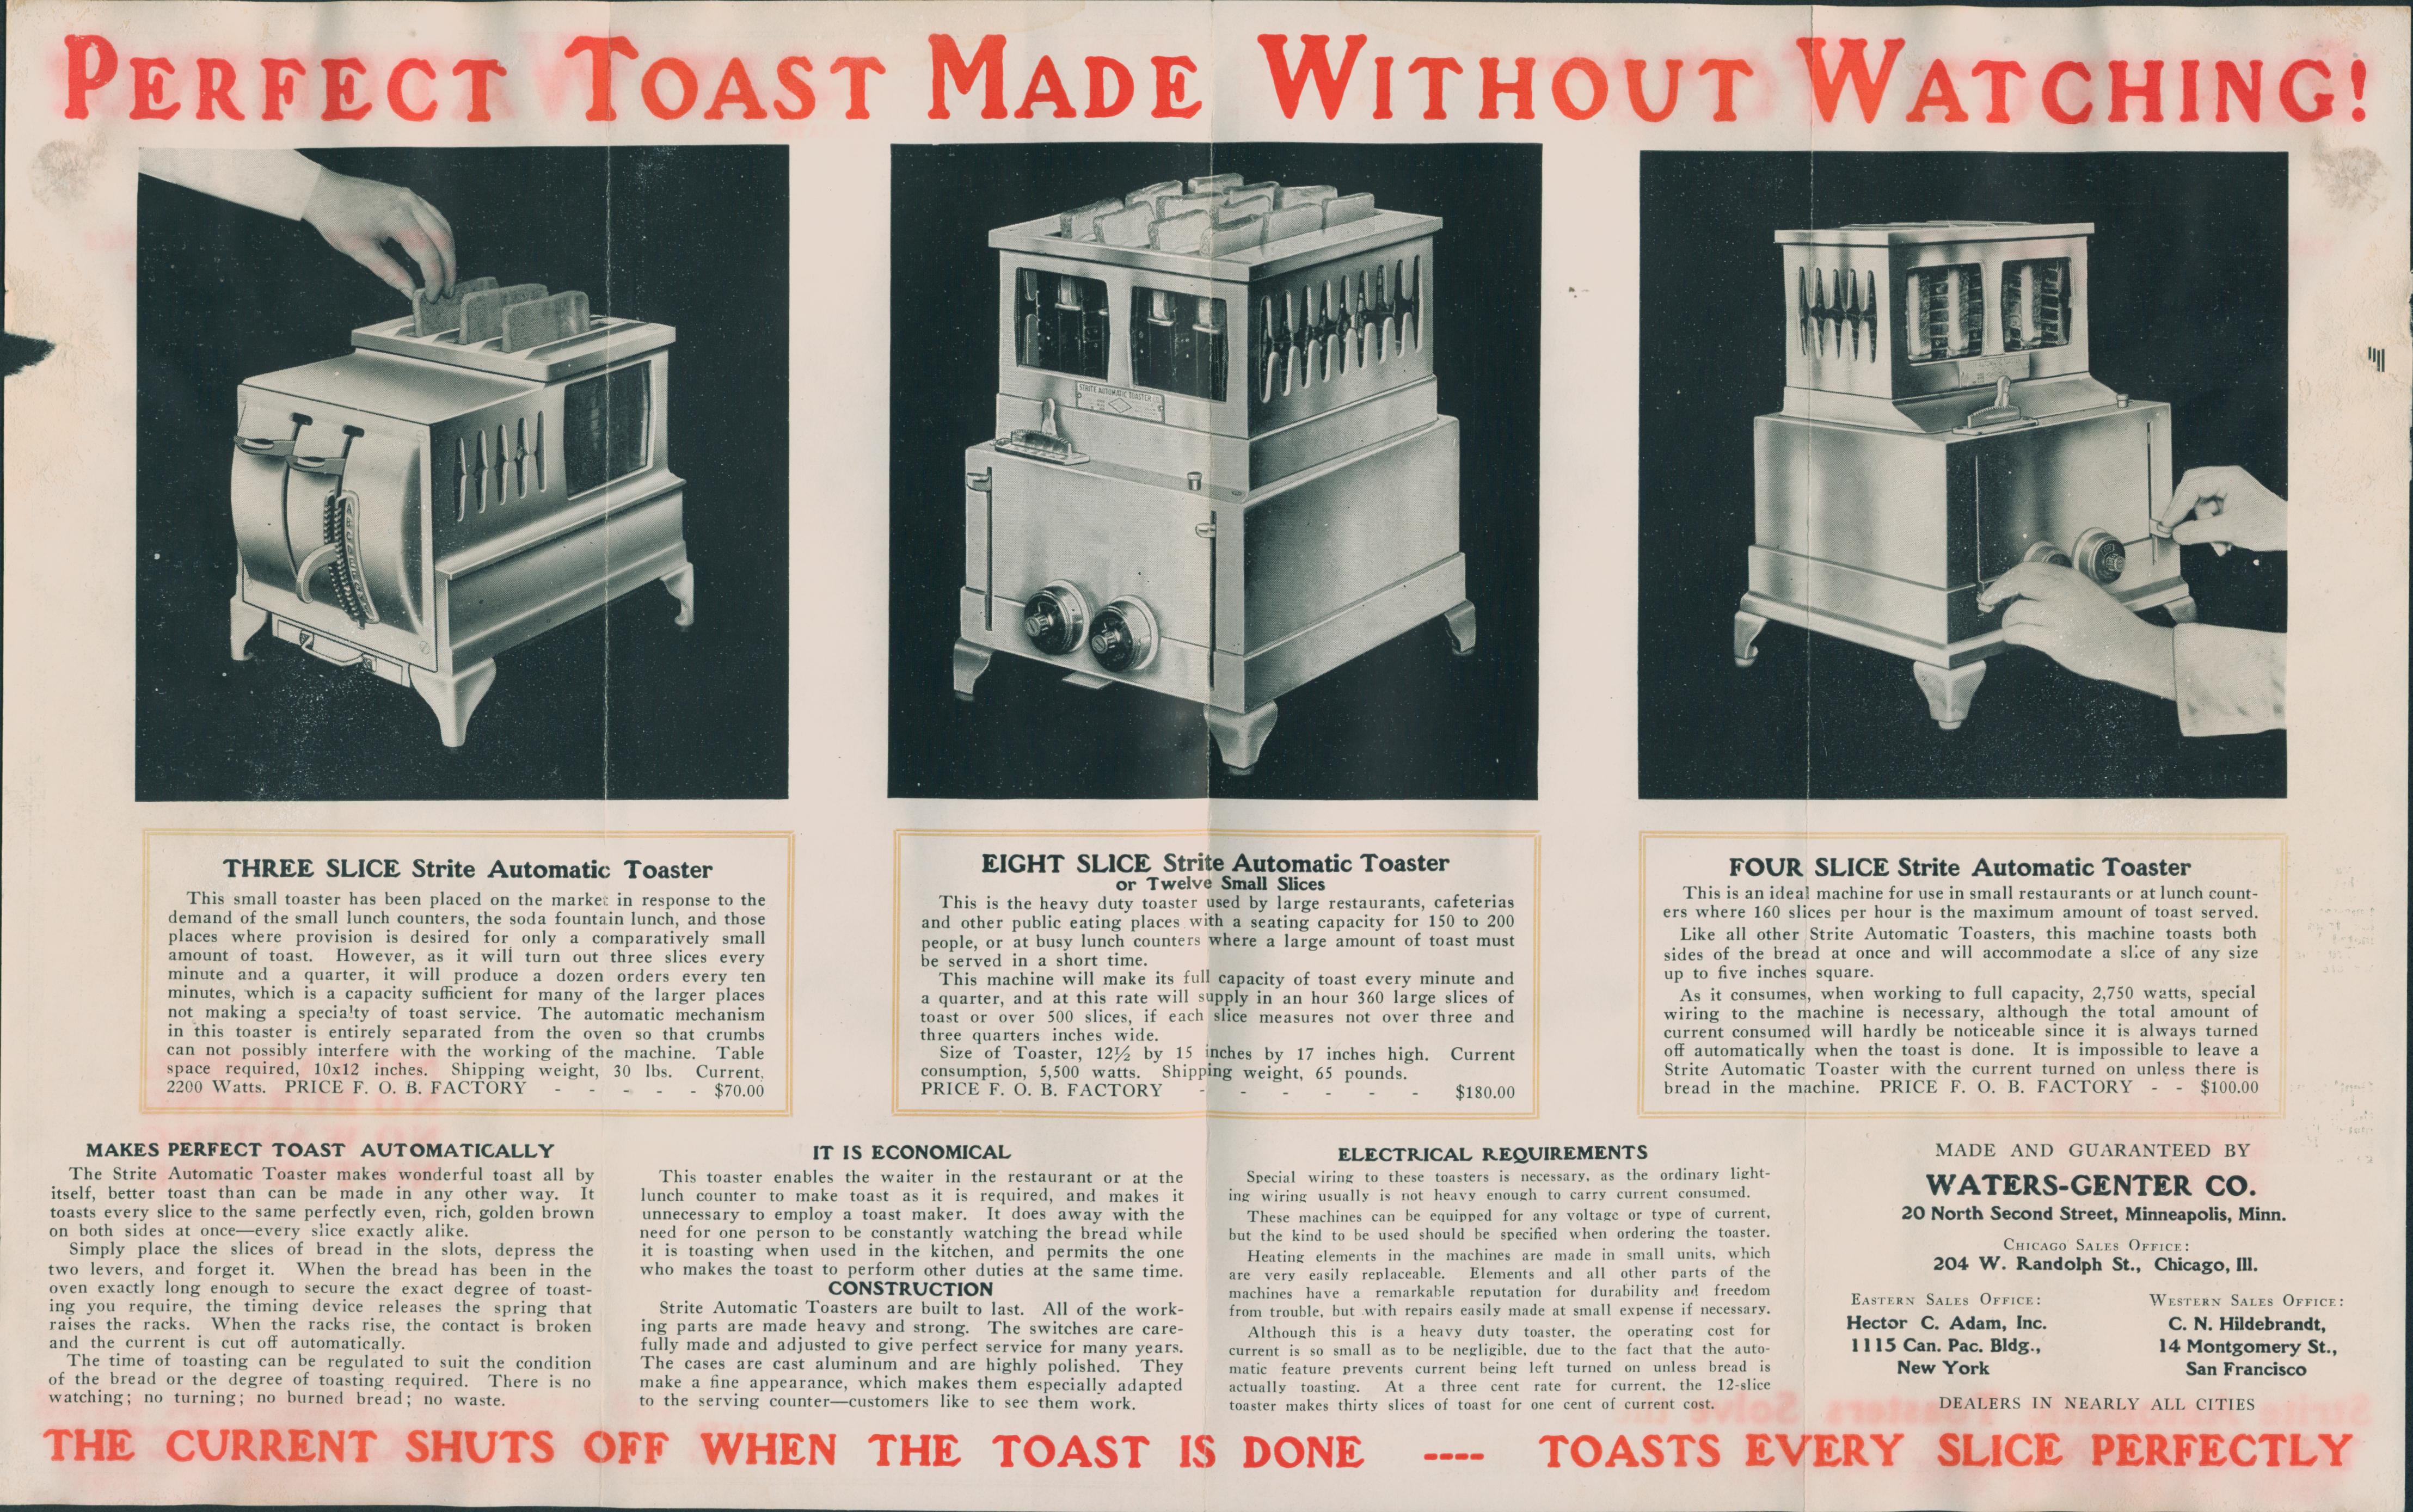 The History of Making Toast